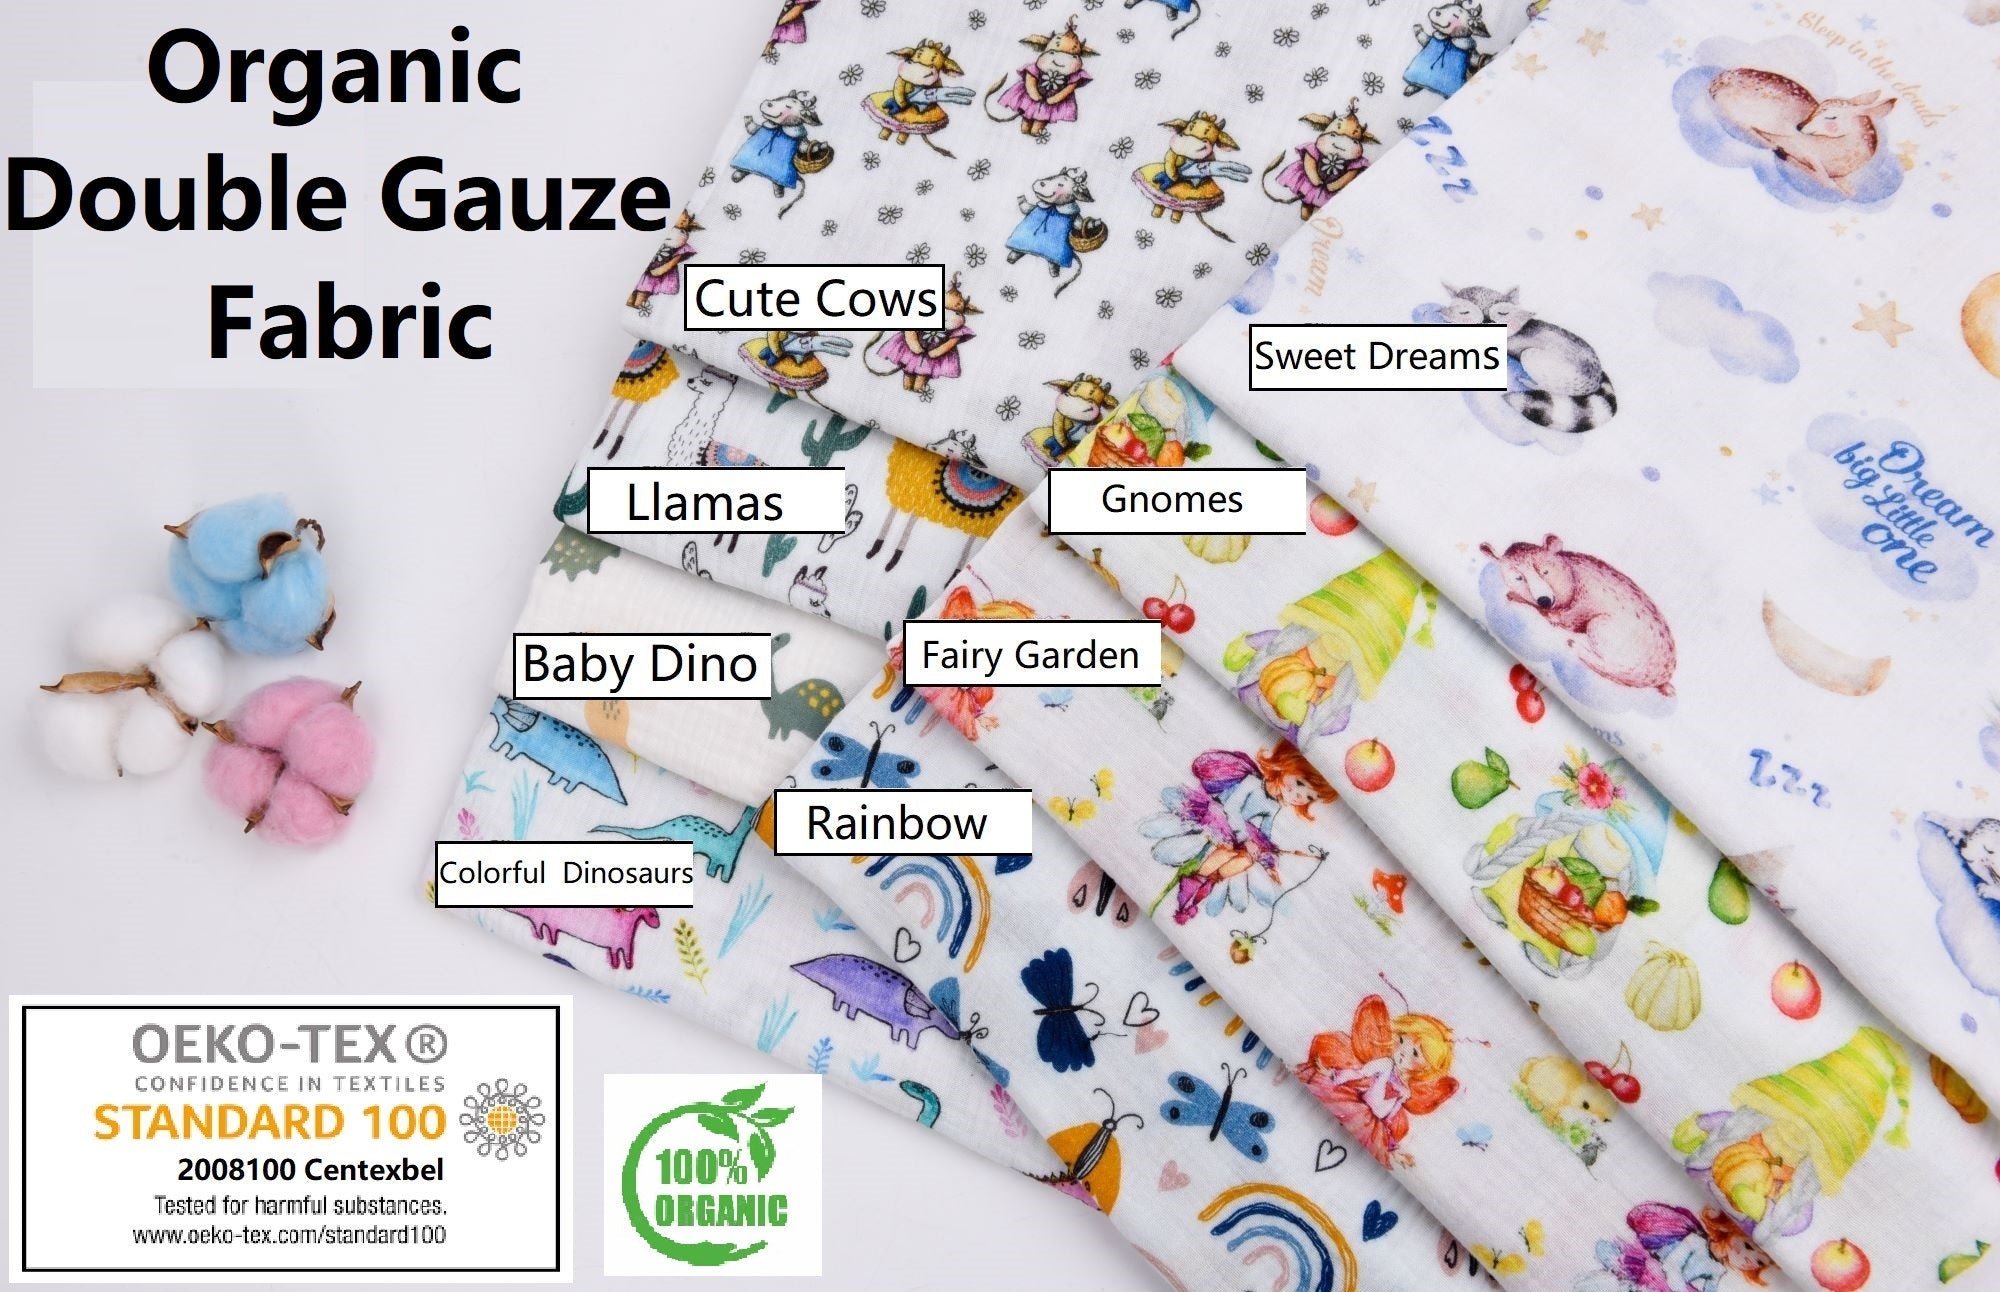 What Are Double Gauze Fabrics? Are They Good for Baby Clothes